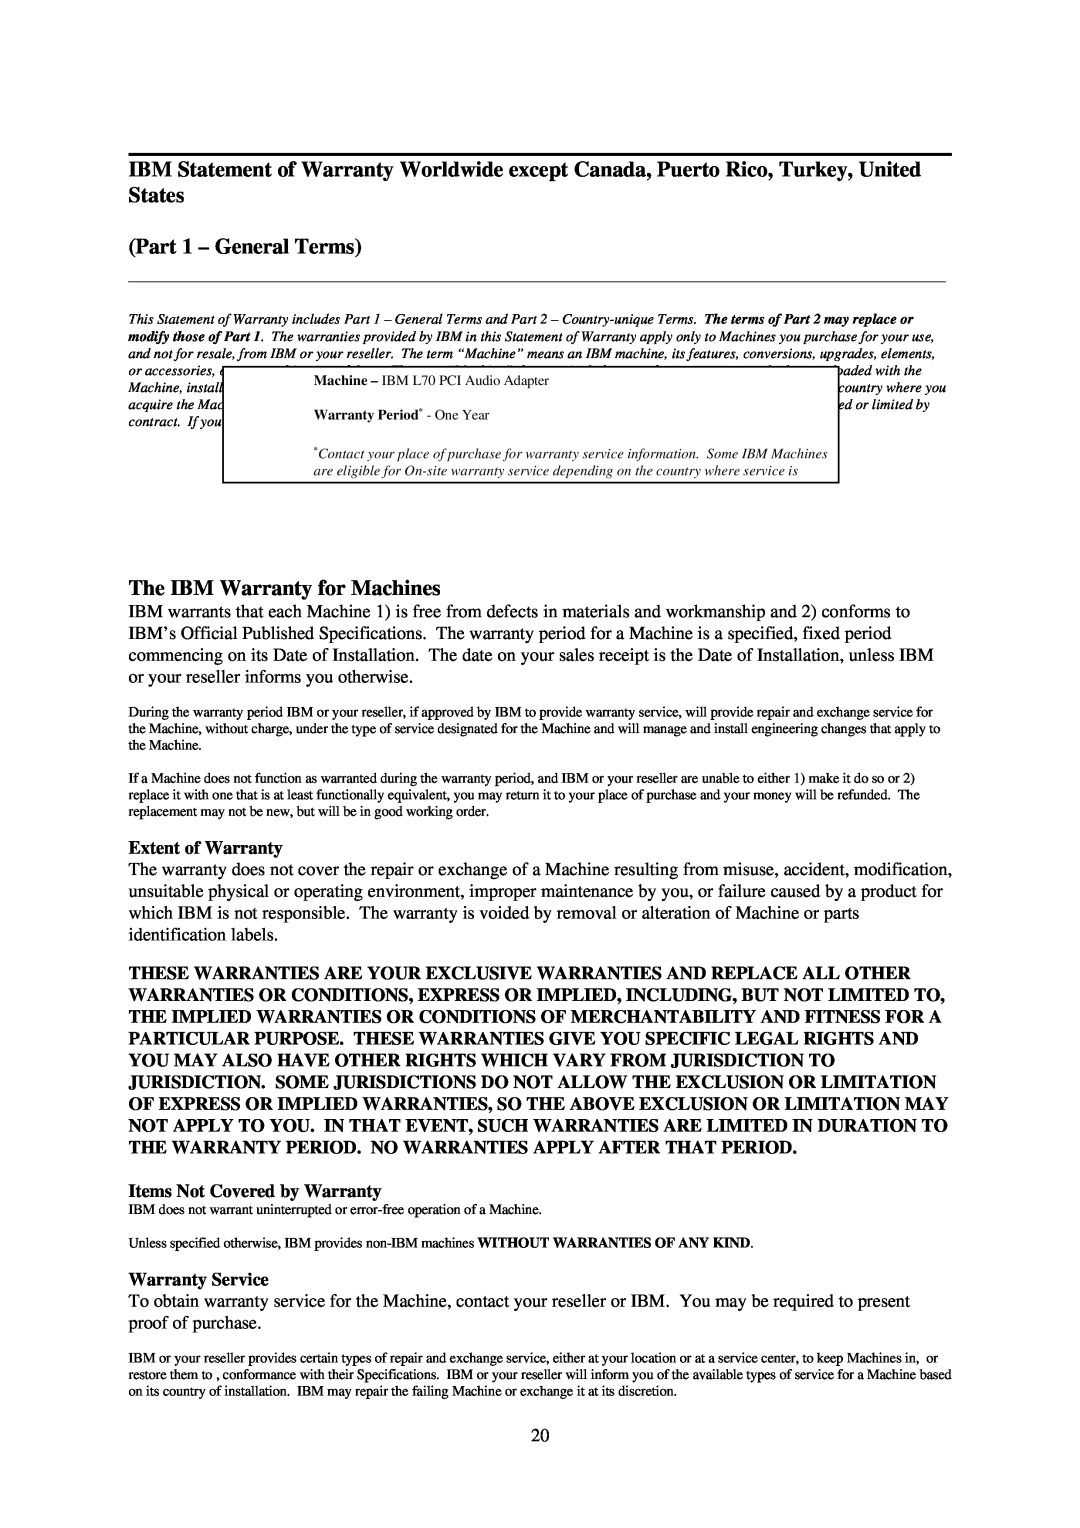 IBM L70 manual Part 1 - General Terms, The IBM Warranty for Machines, Extent of Warranty, Items Not Covered by Warranty 